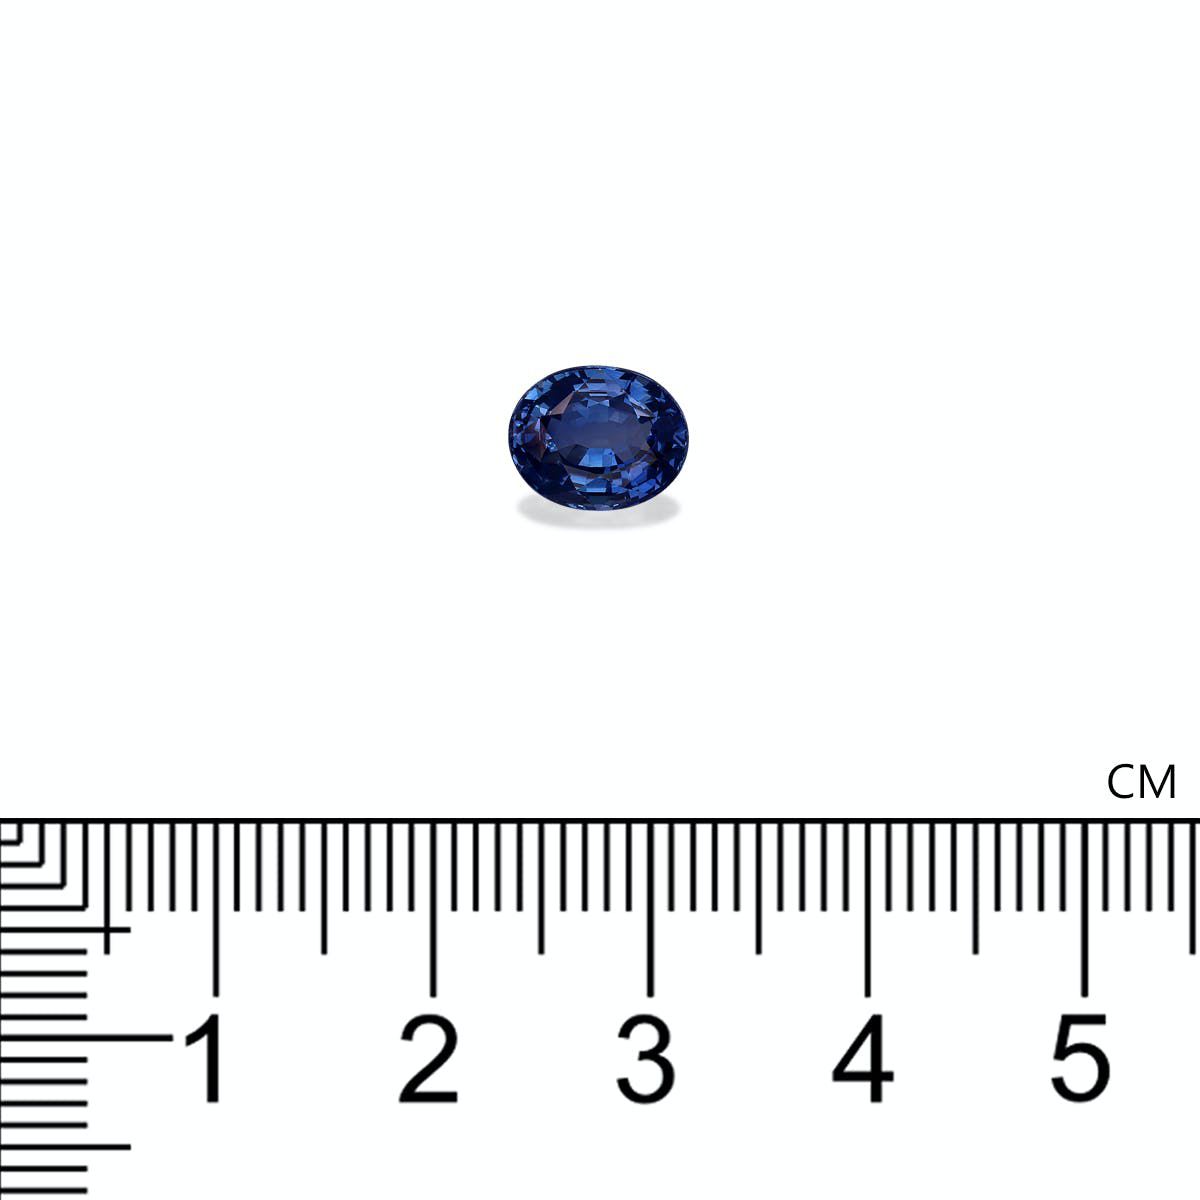 Picture of Blue Sapphire Unheated Madagascar 2.04ct - 8x6mm (BS0219)